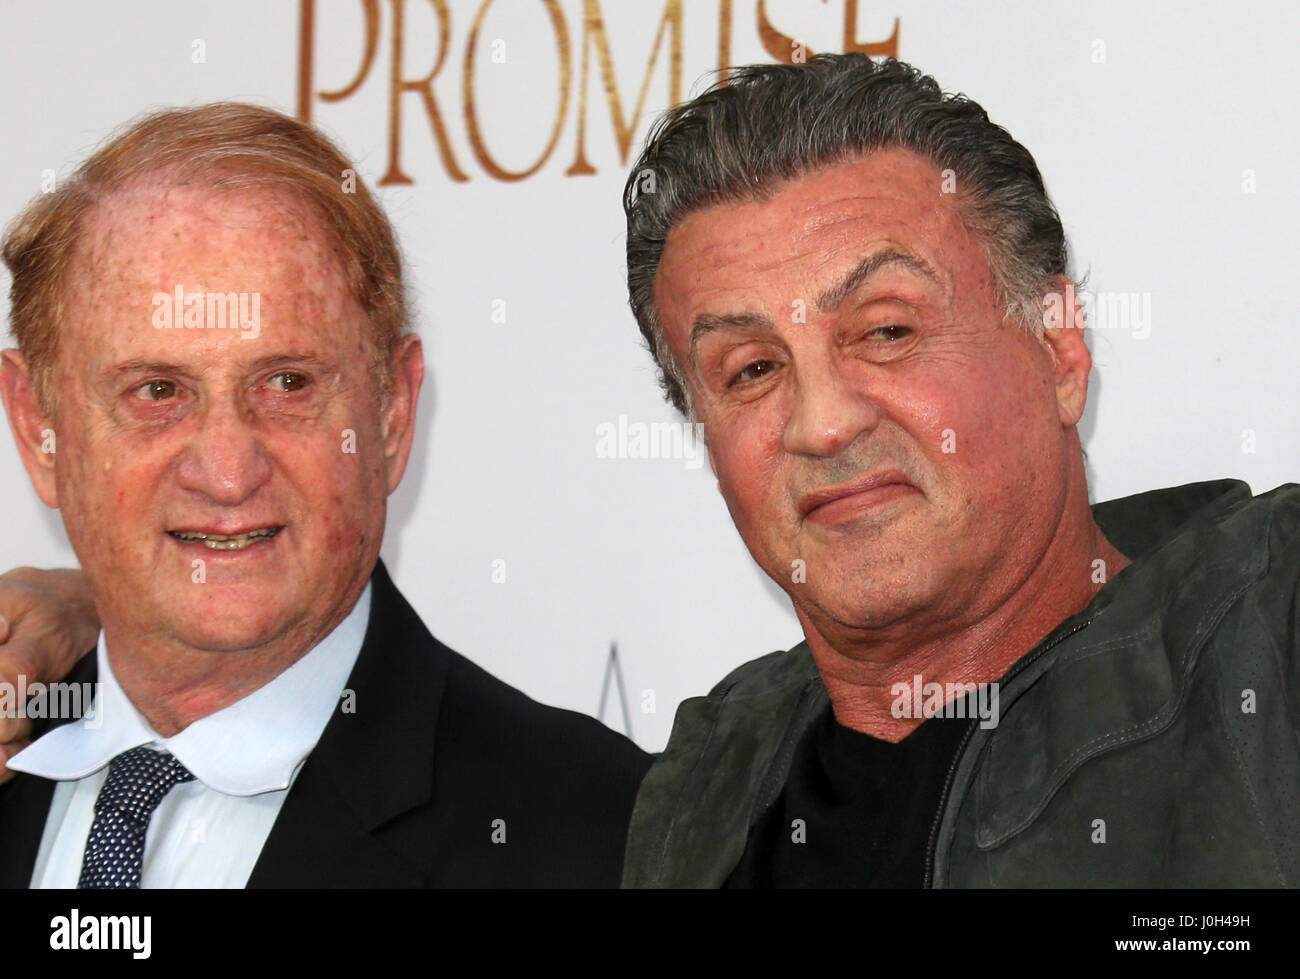 Hollywood, Ca. 12th Apr, 2017. Mike Medavoy, Sylvester Stallone, at Premiere Of Open Road Films' 'The Promise' at TCL Chinese Theatre IMAX In California on April 12, 2017. Credit: Fs/Media Punch/Alamy Live News Stock Photo